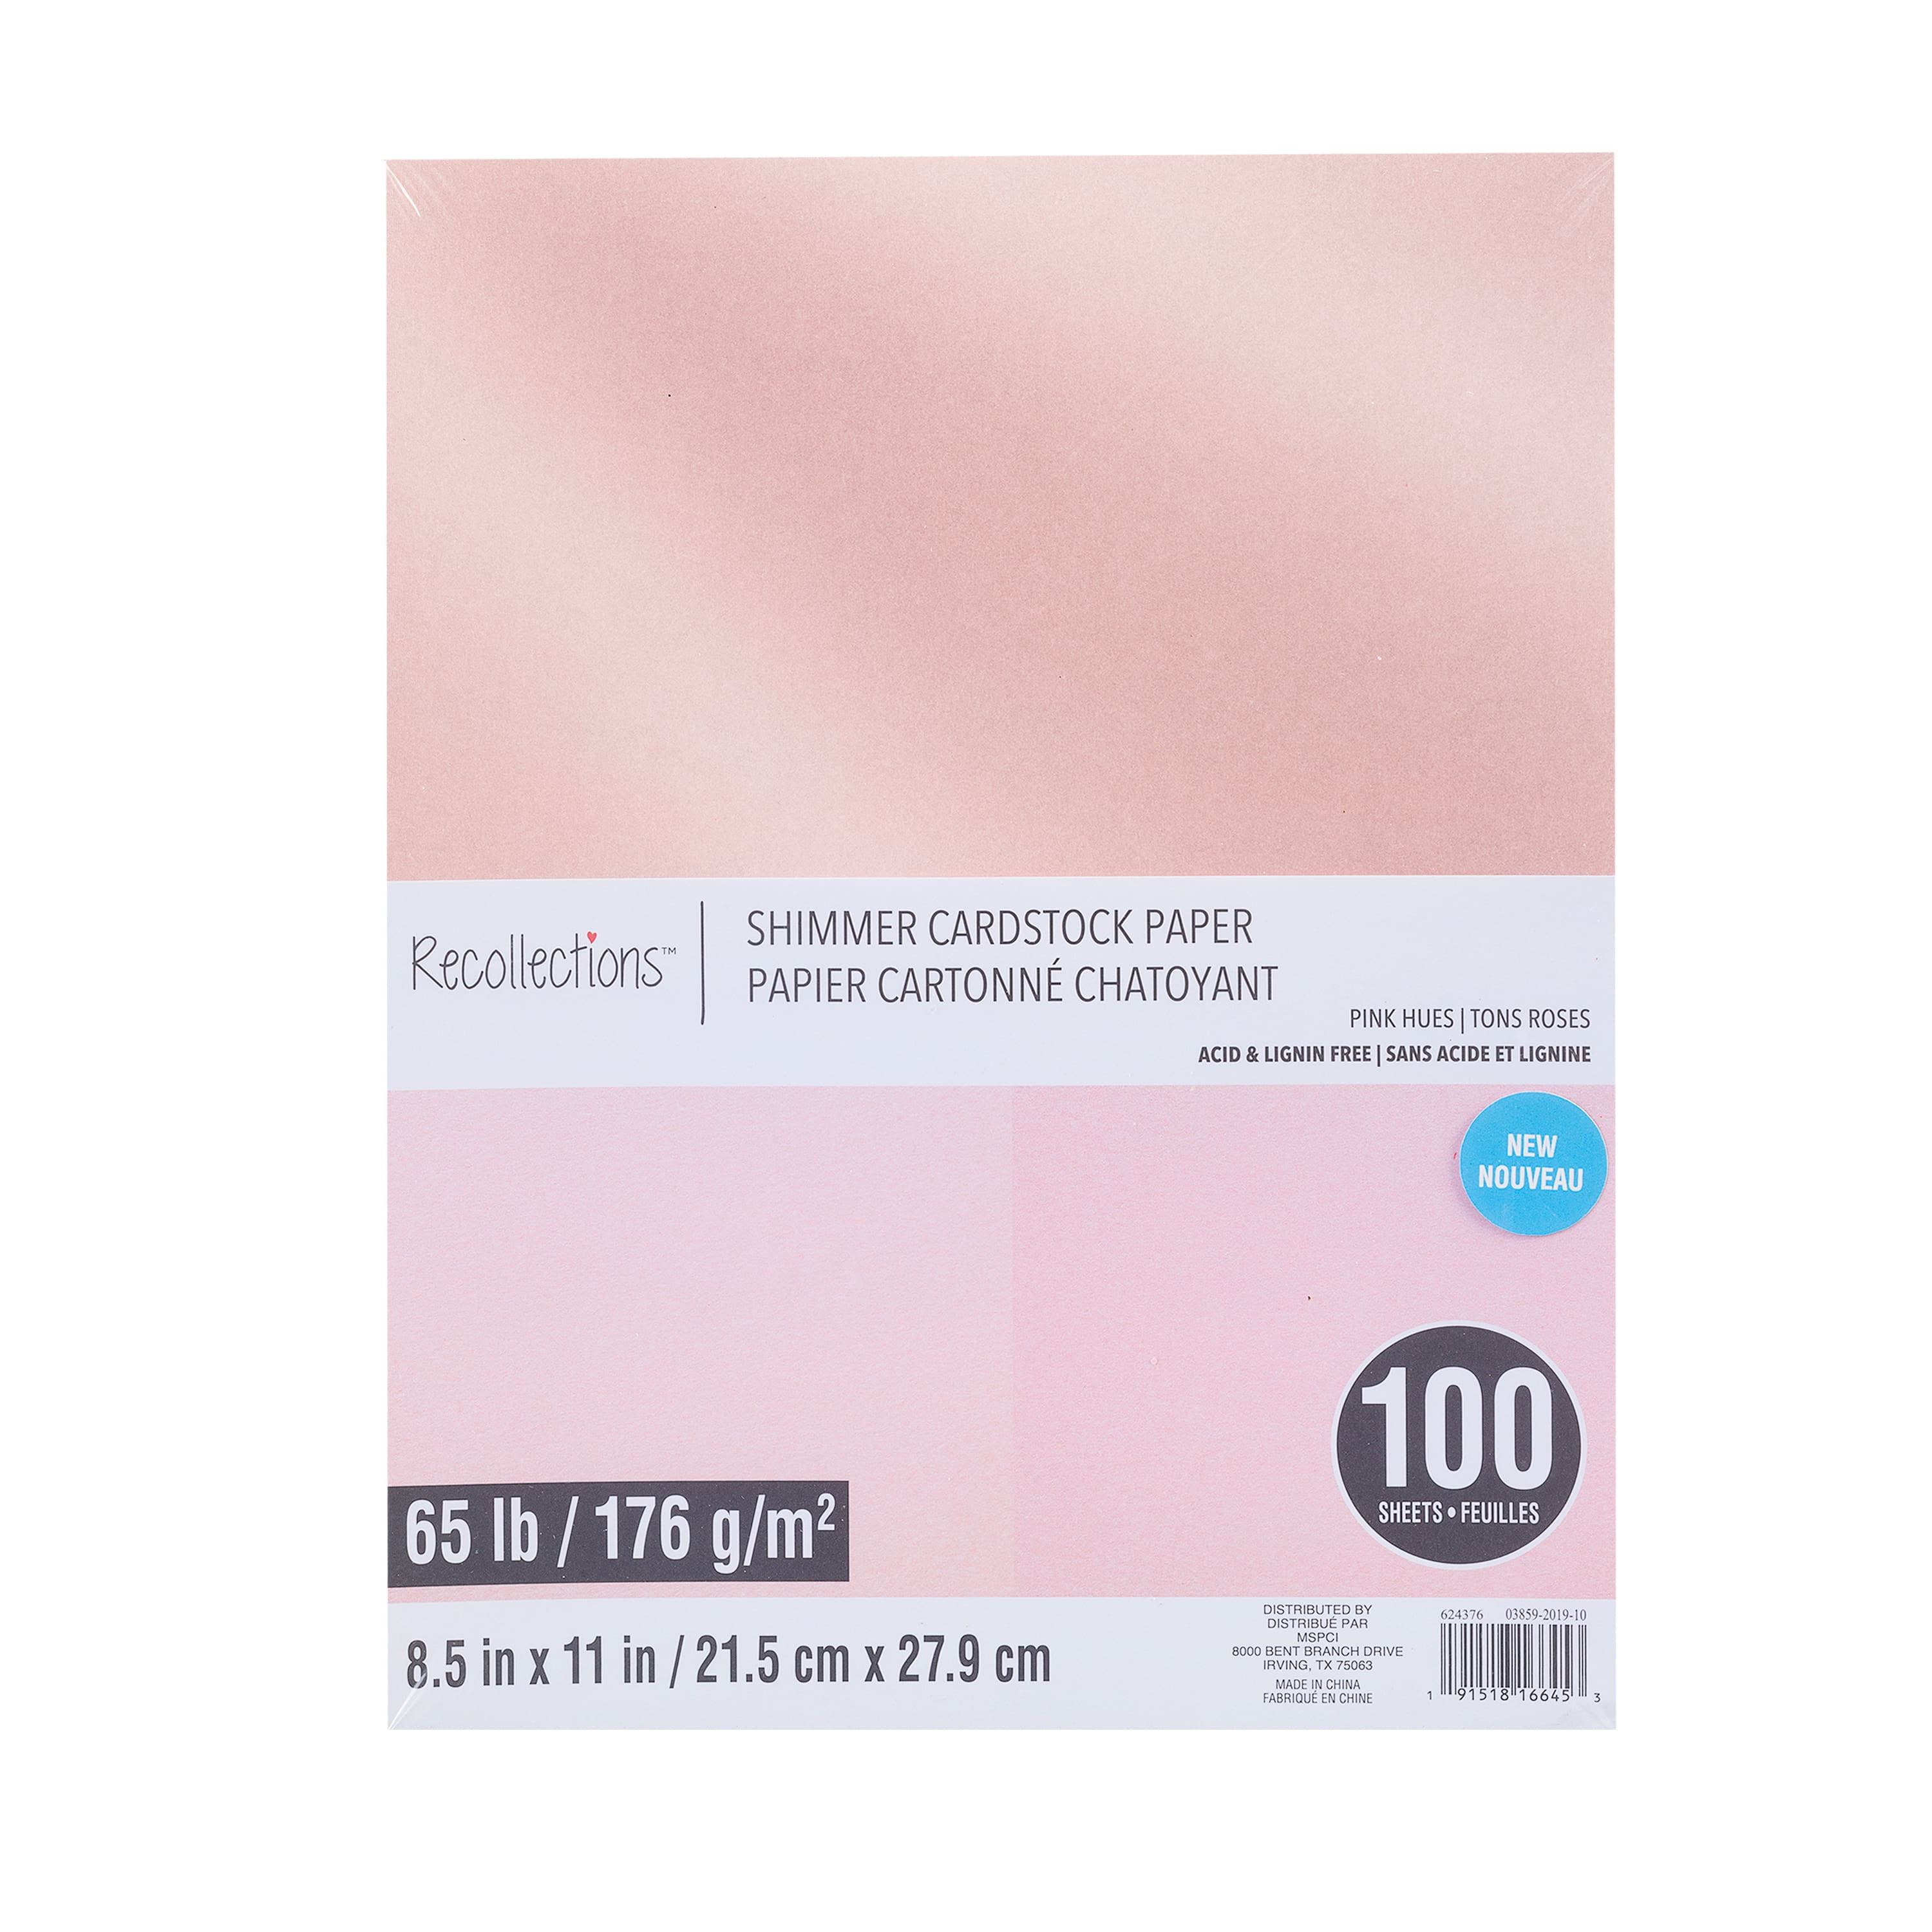 9 Packs: 100 ct. (900 total) Pink Hues Shimmer 8.5 x 11 Cardstock Paper  by Recollections™ 